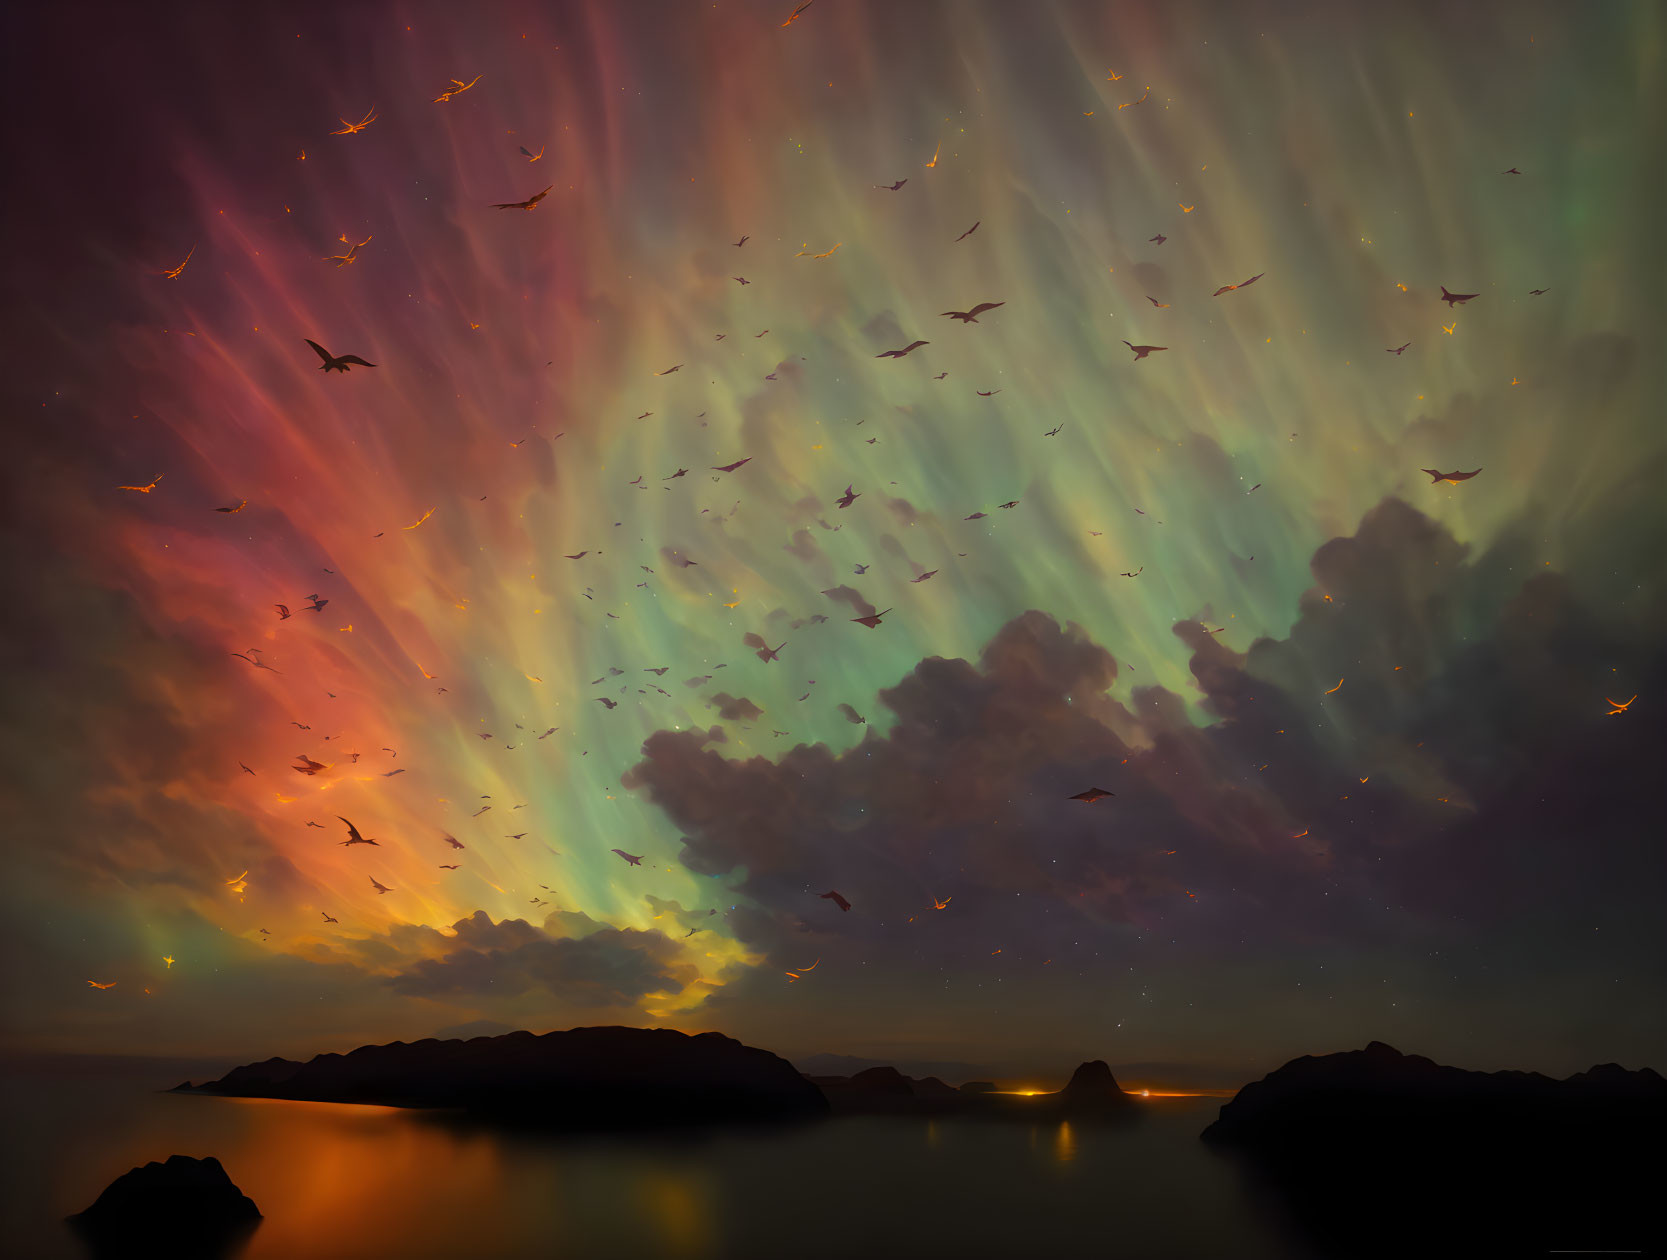 Dramatic Dusk Sky with Aurora Lights and Birds Flying over Serene Seascape